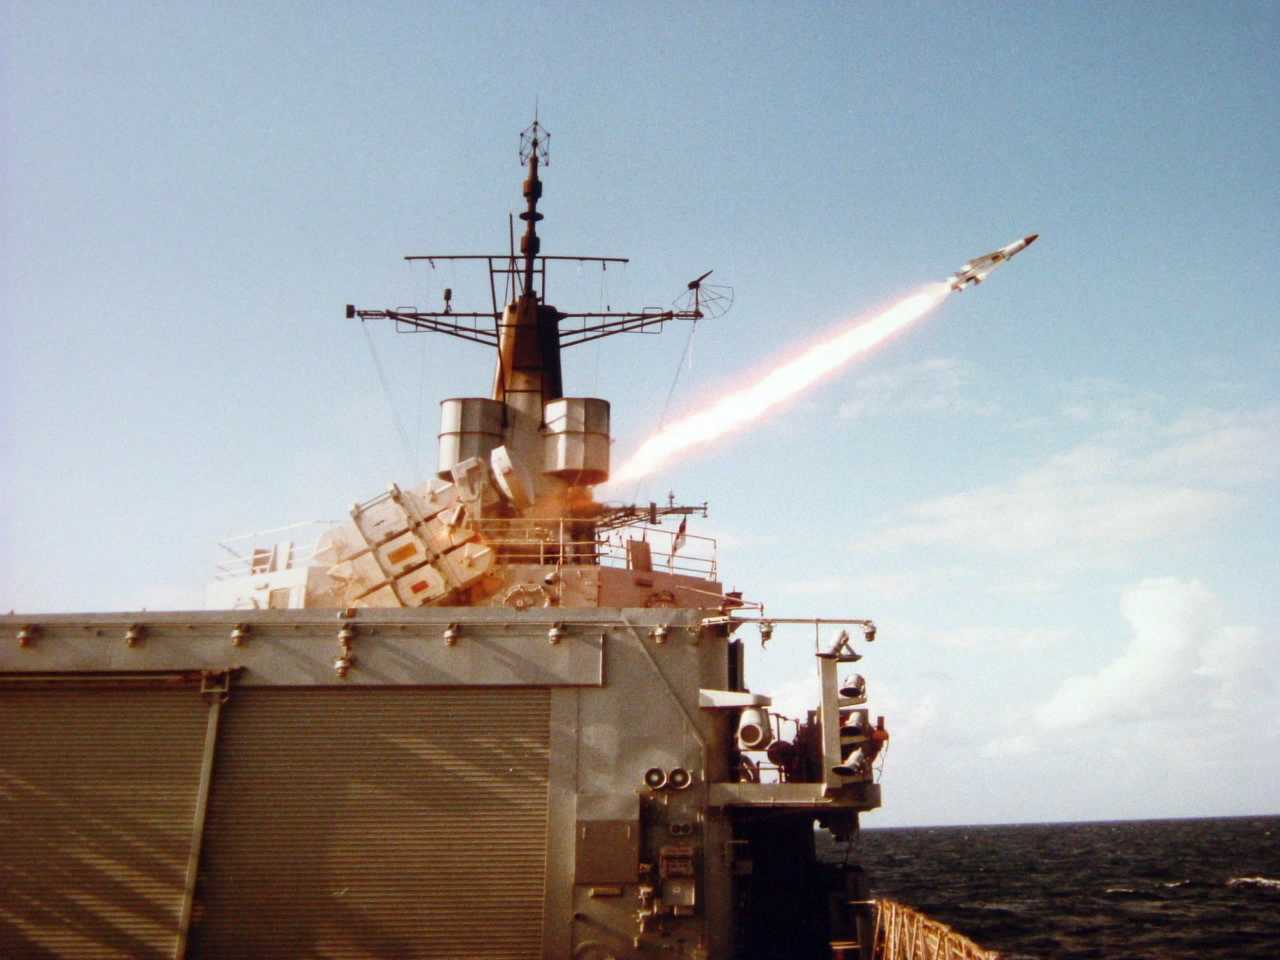 A Seawold Missile firing from the HMS Brazen